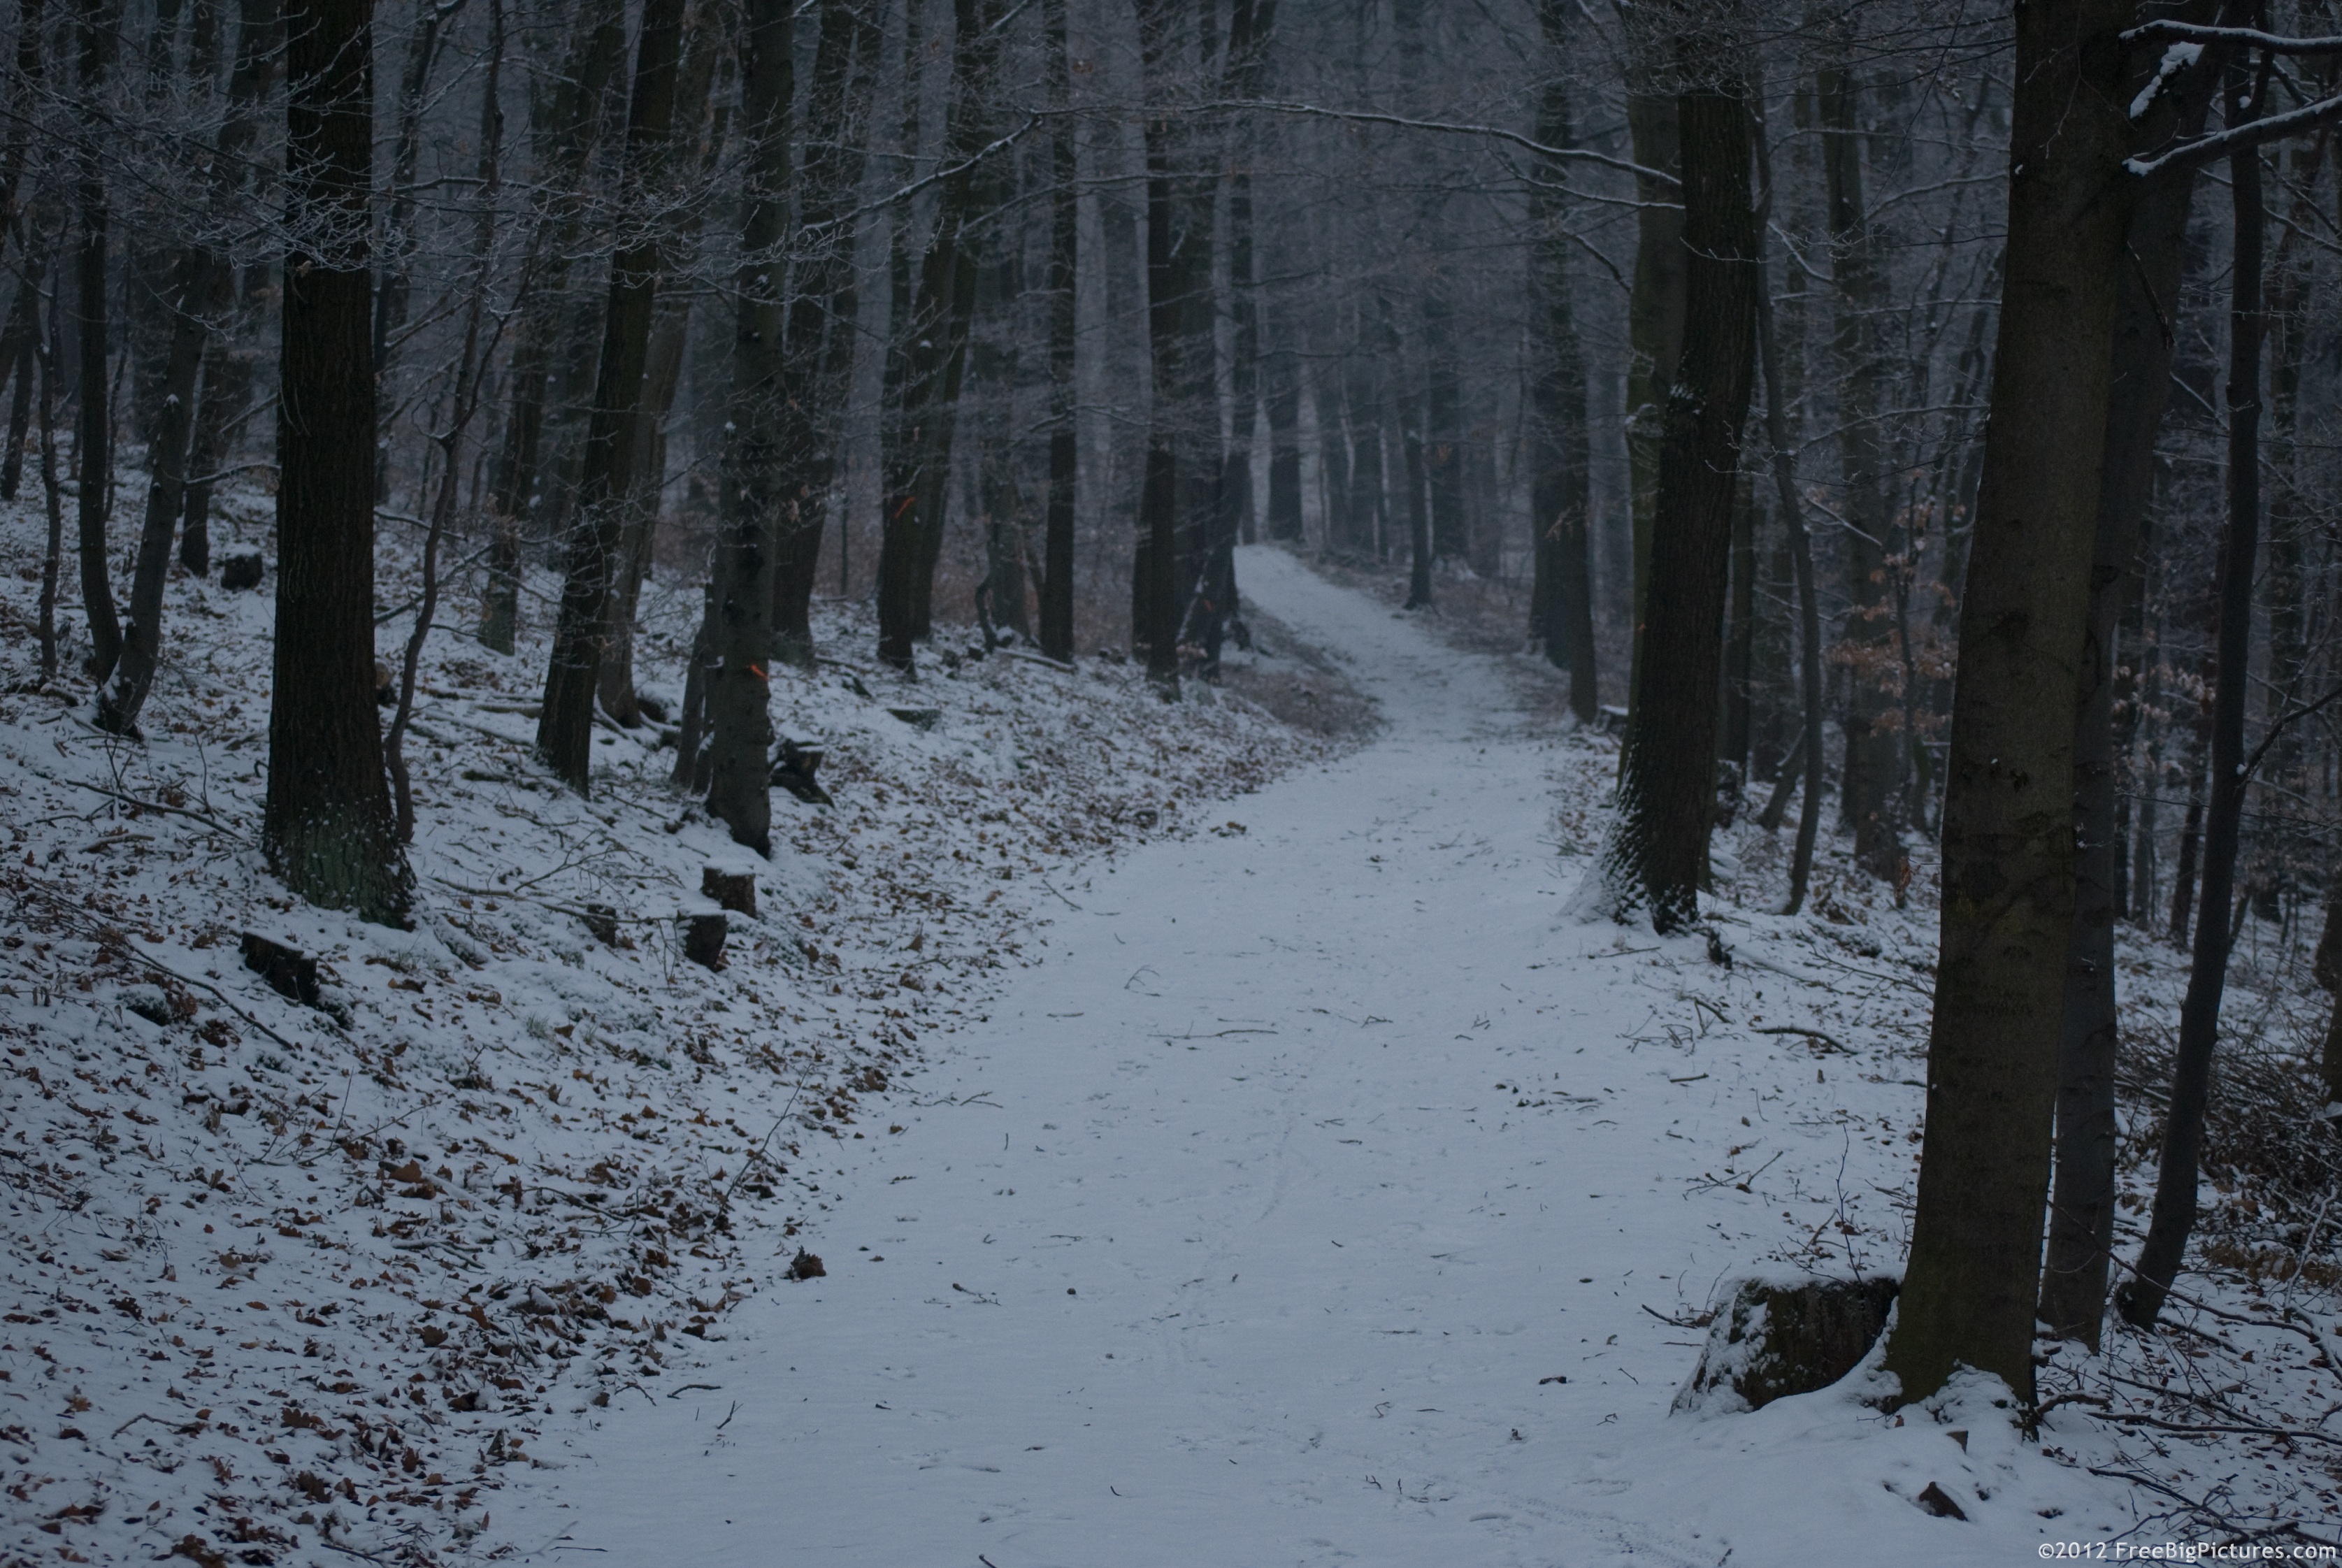 A path in the forest on a snowy winter